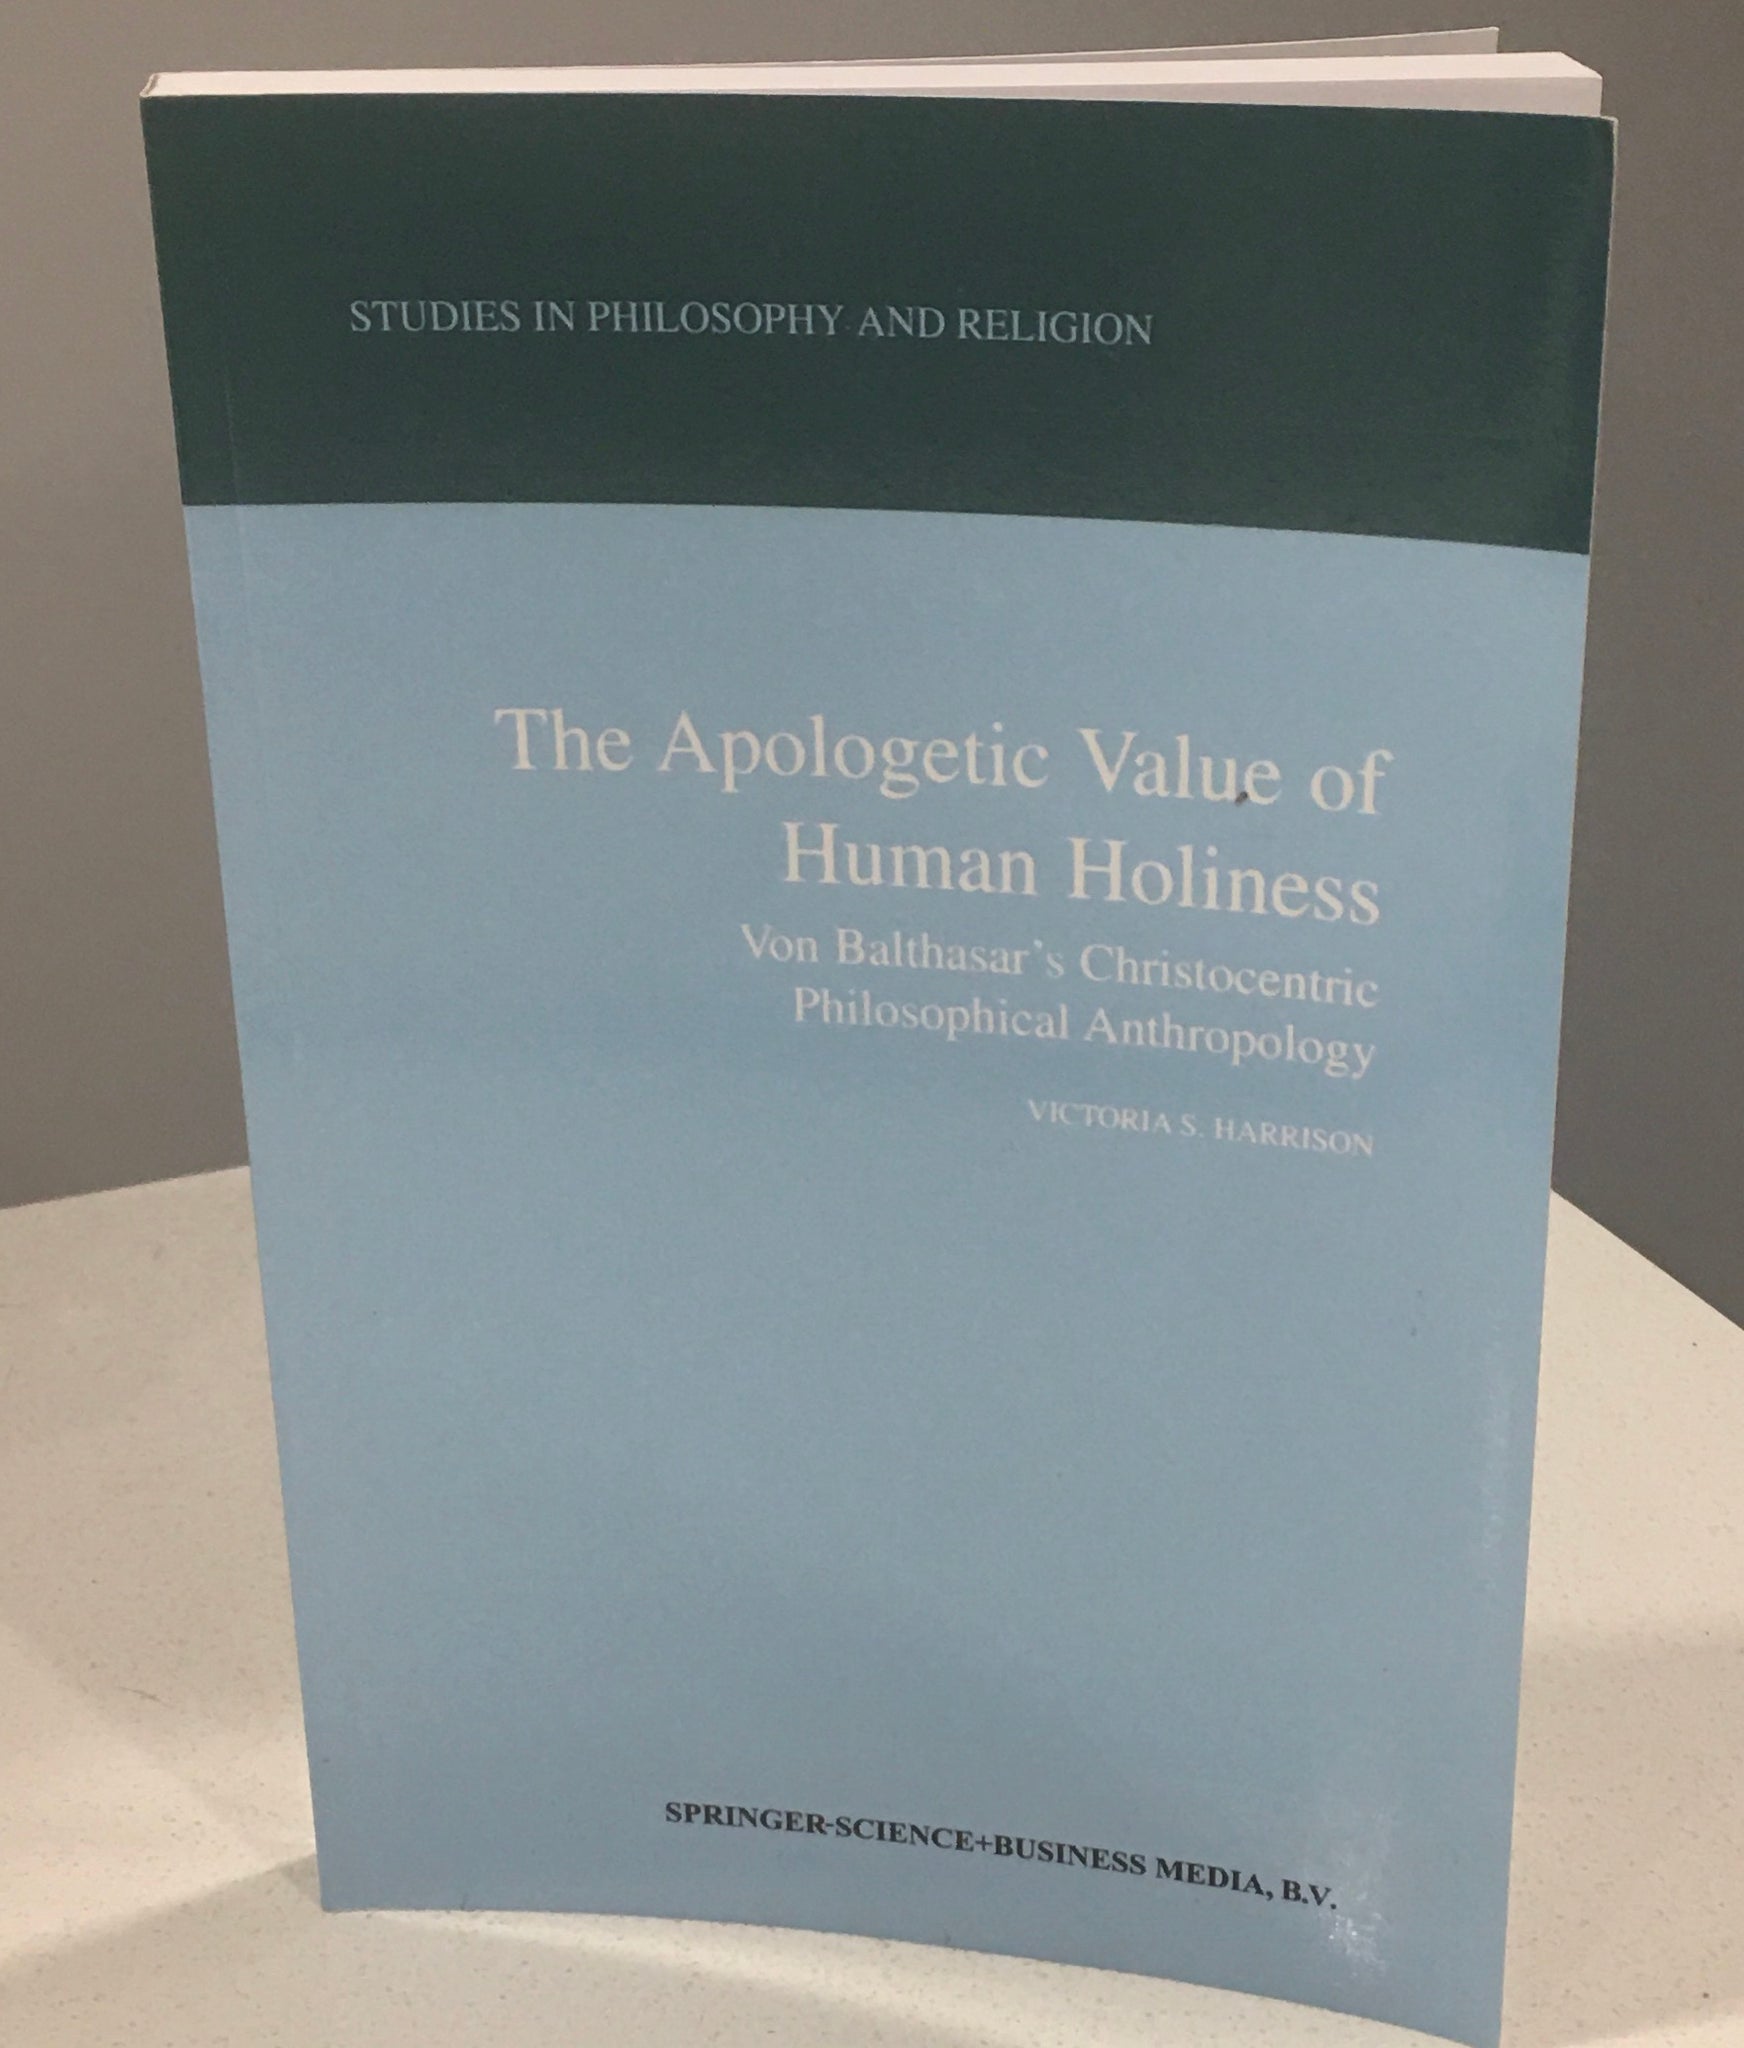 The Apologetic Value of Human Holiness Von Balthasar's Christocentric Philosophical Anthropology